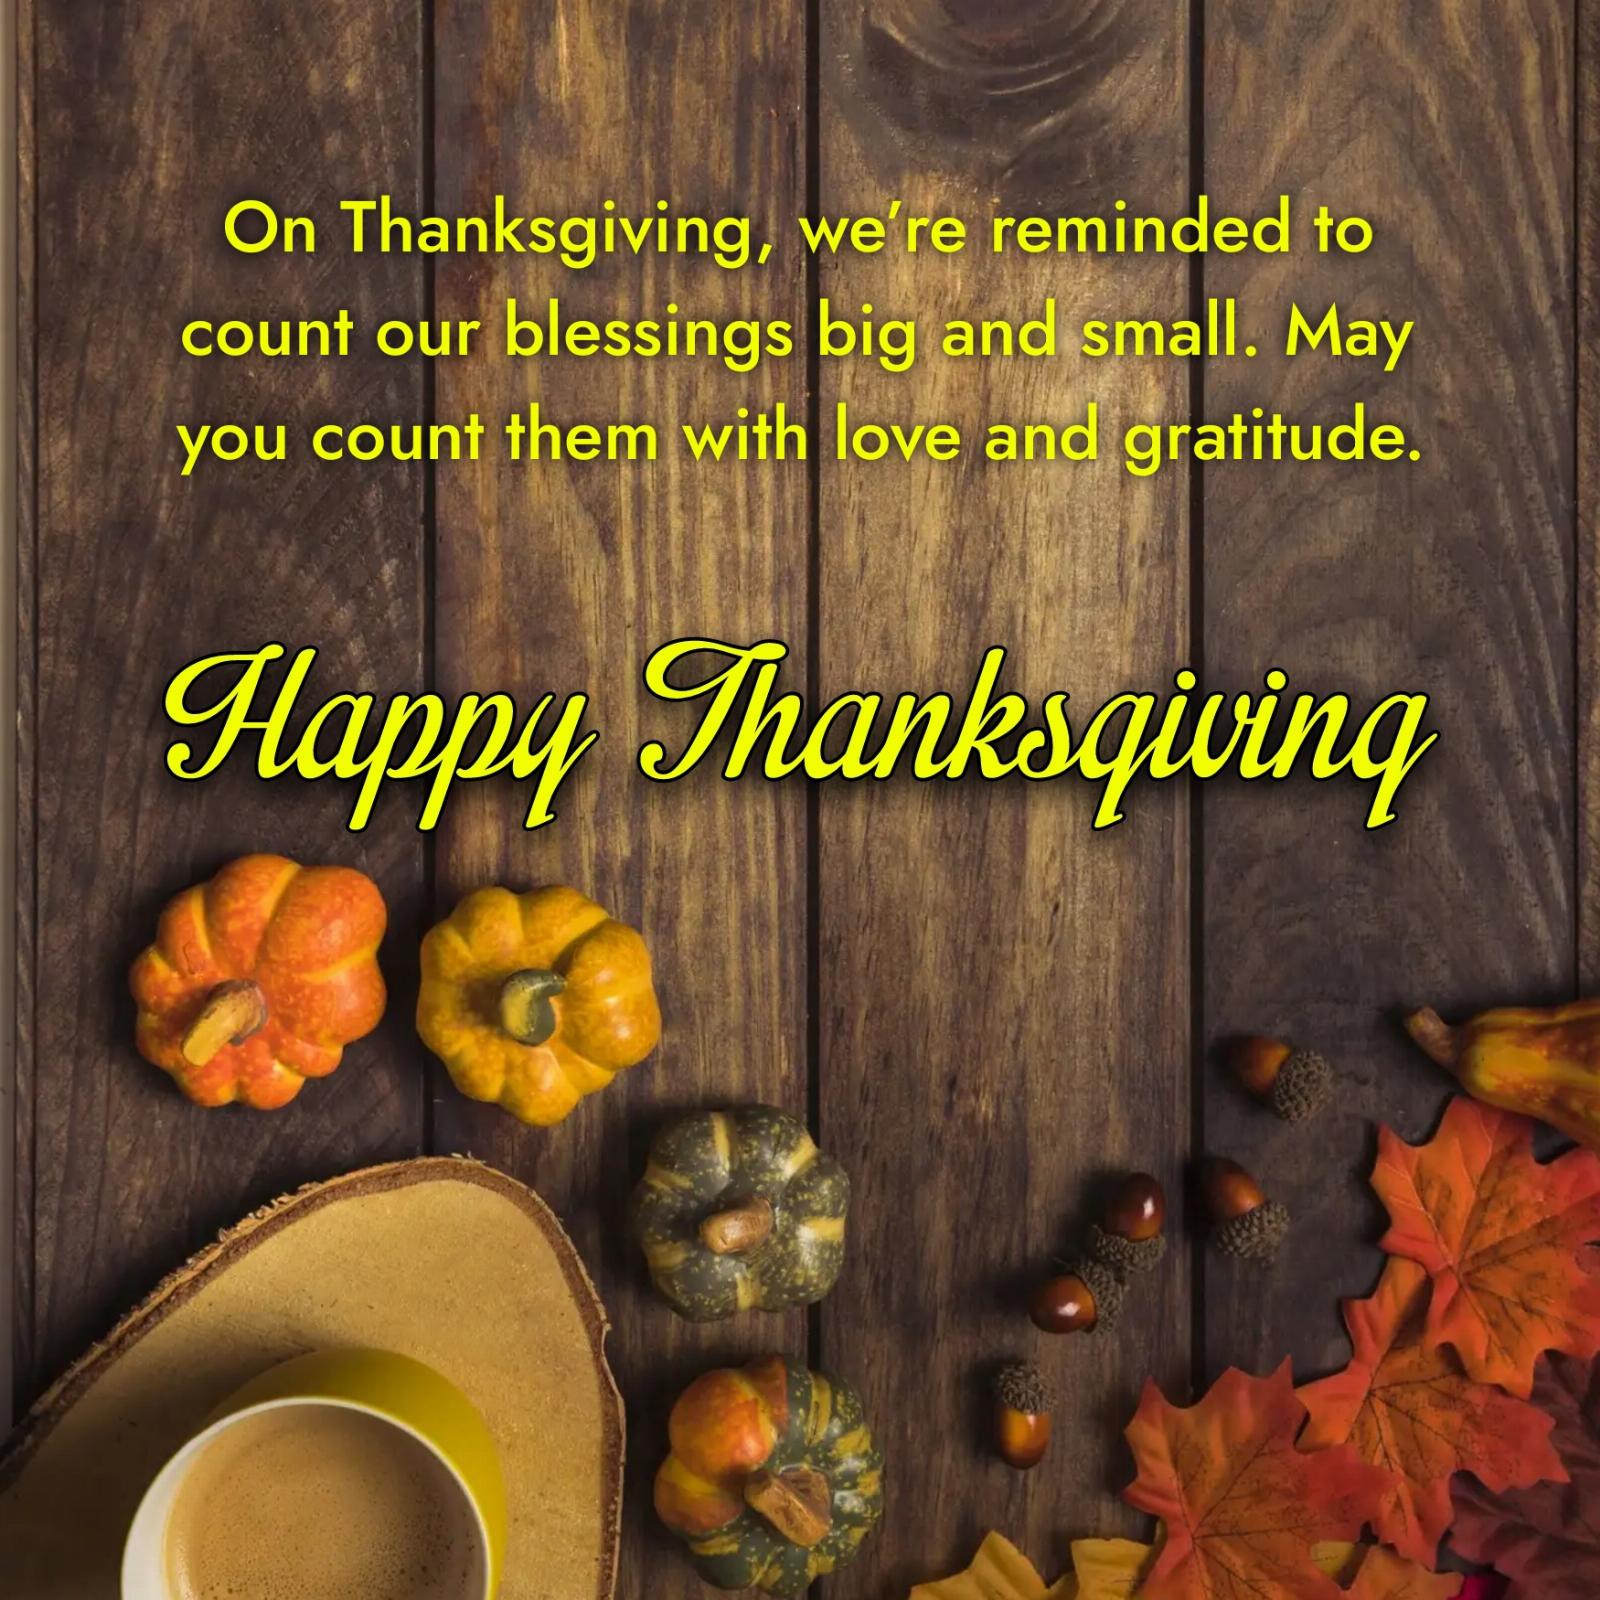 On Thanksgiving were reminded to count our blessings big and small